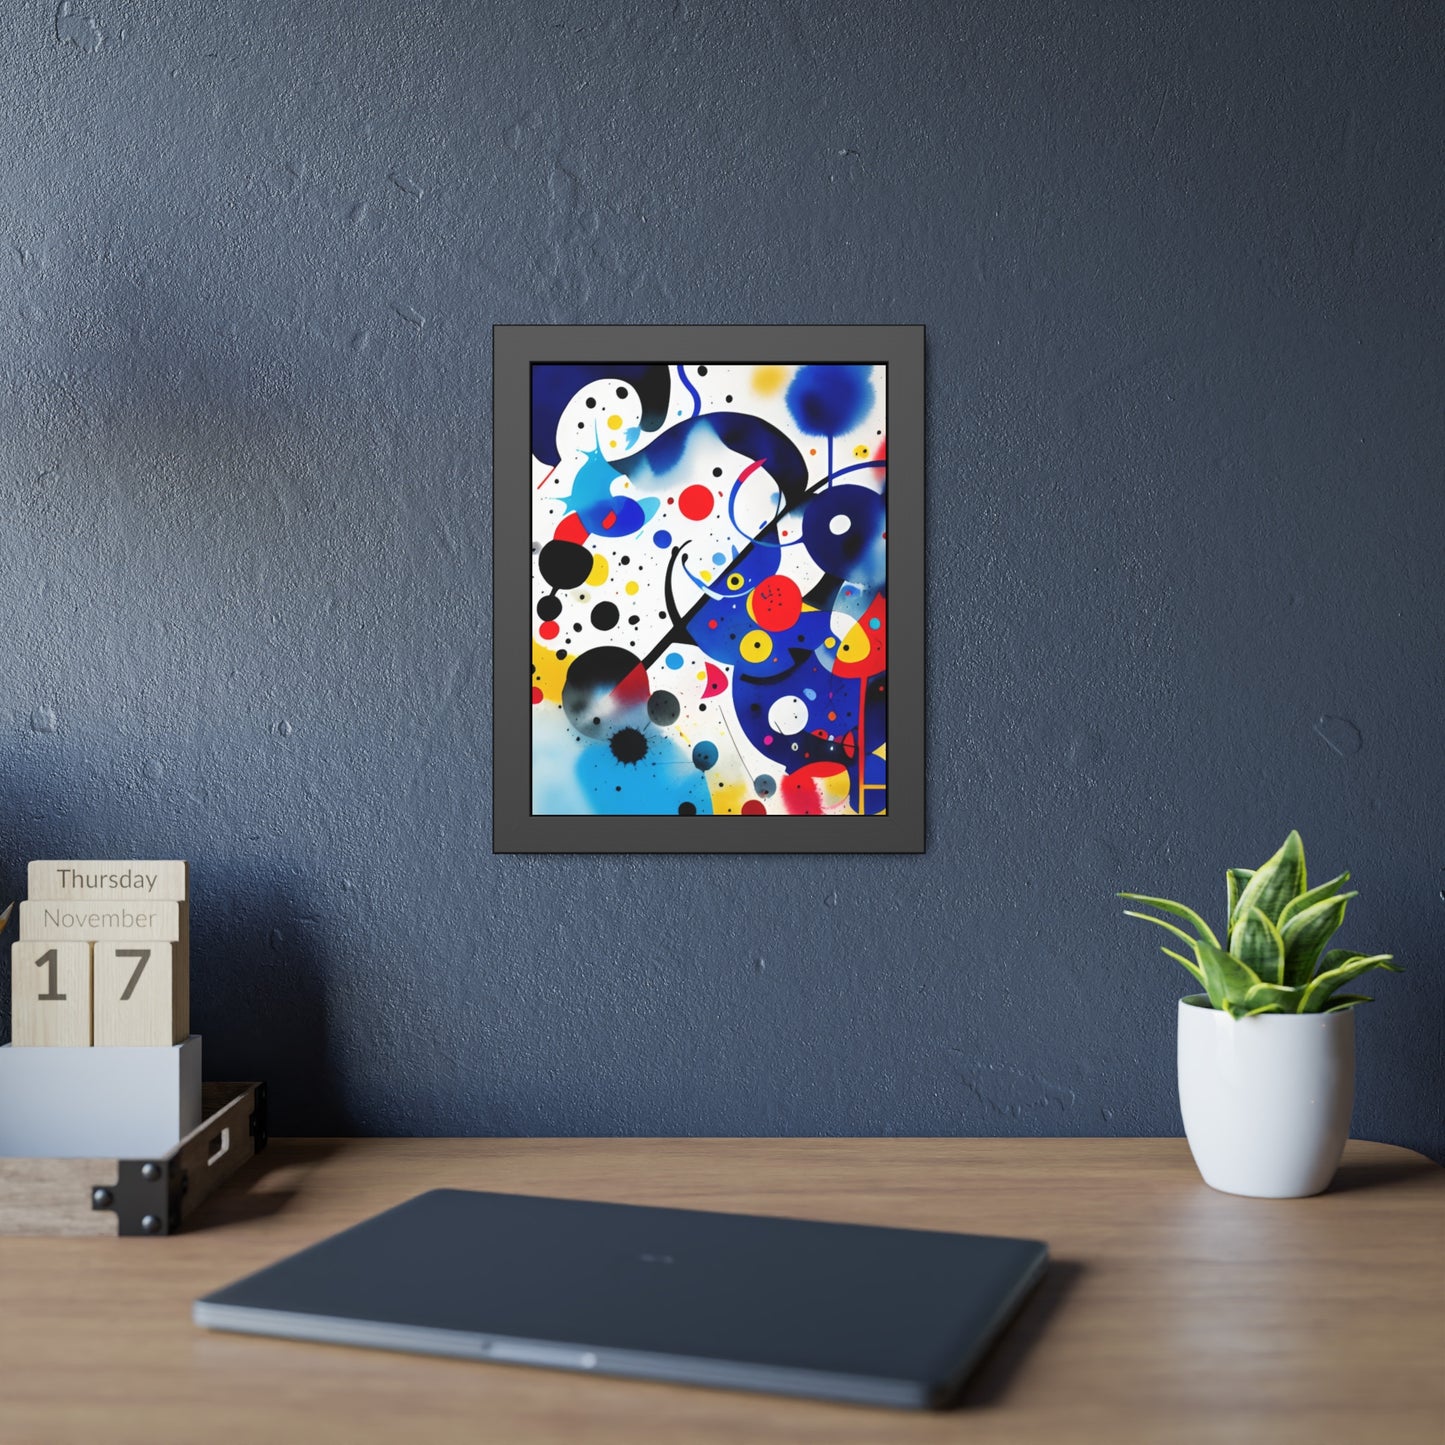 Framed Paper Poster, Inspired by Miro